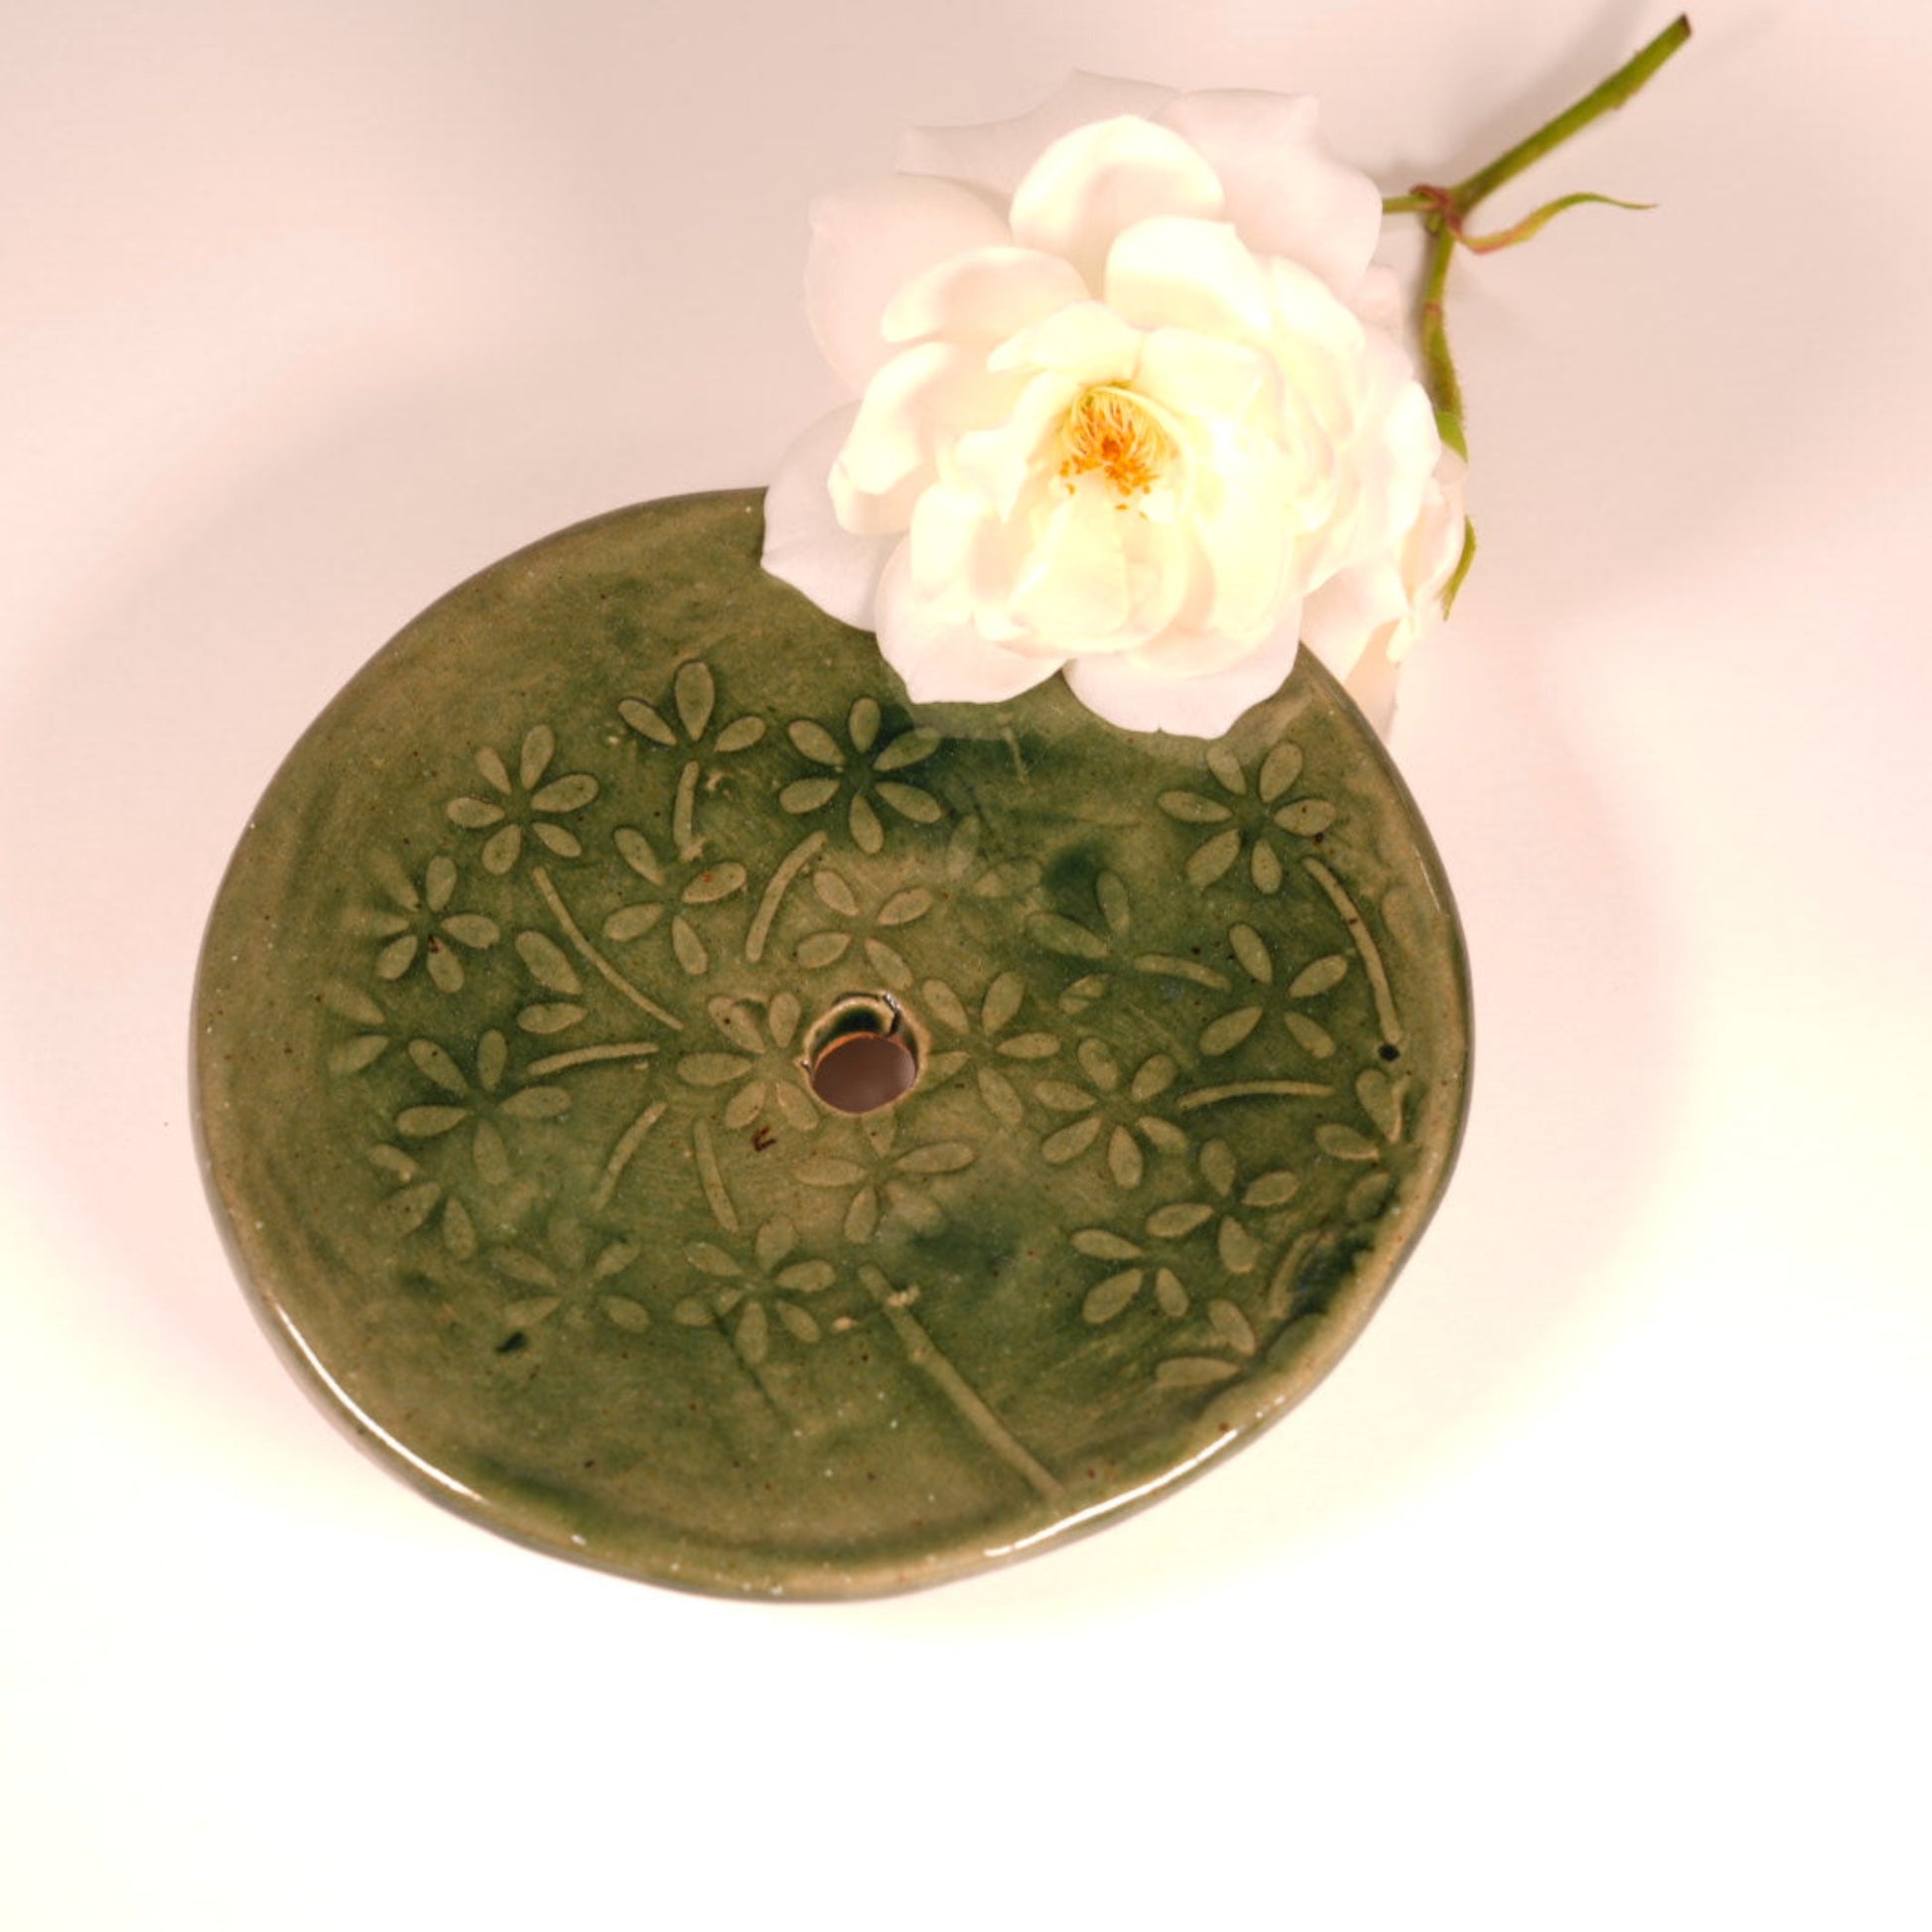 Round olive green soap dish with imprinted flower design